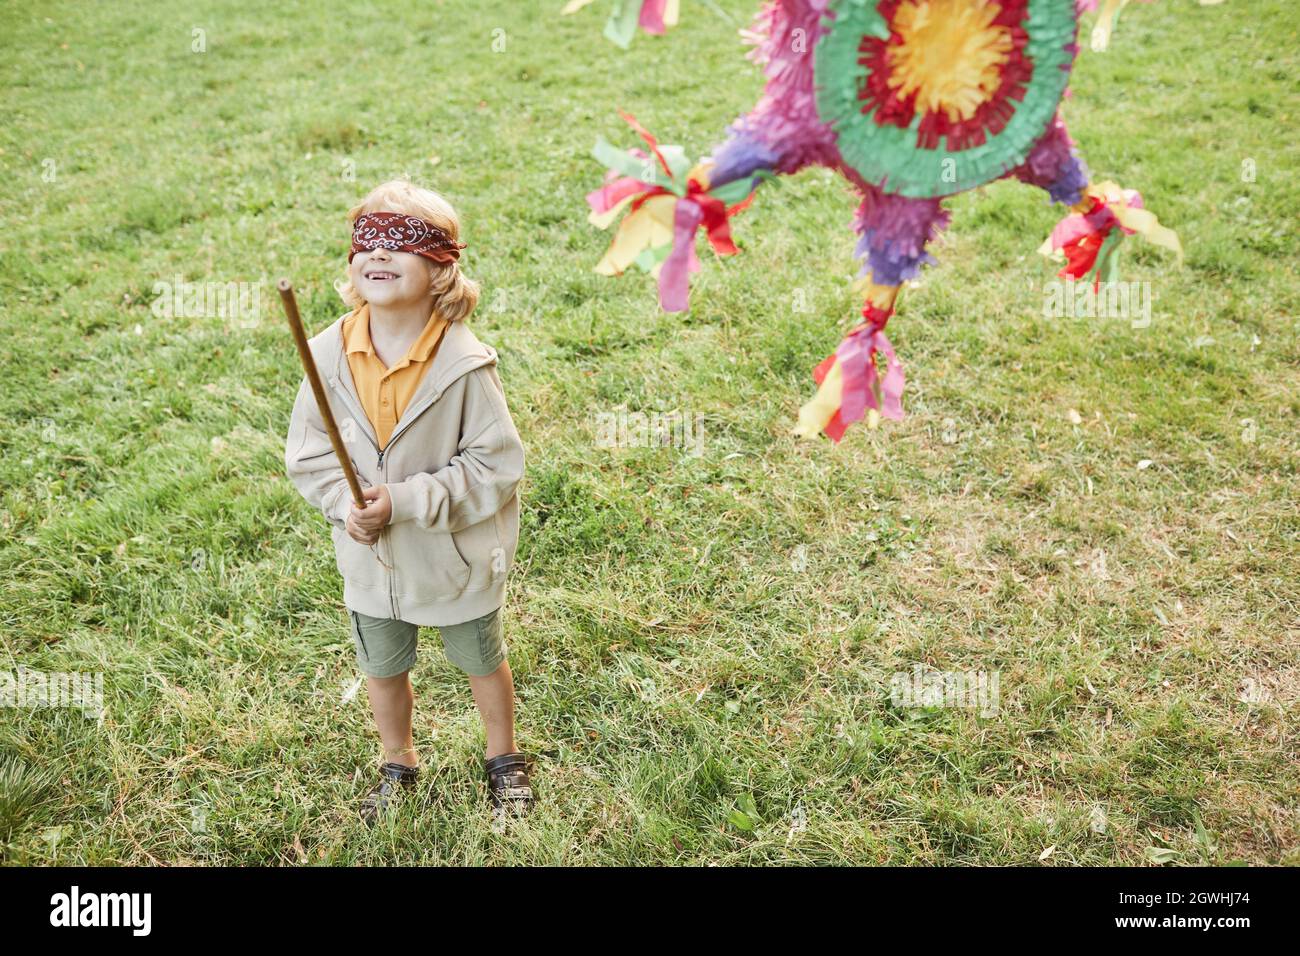 Portrait of boy playing pinata game at Birthday party outdoors and holding  bat, copy space Stock Photo - Alamy